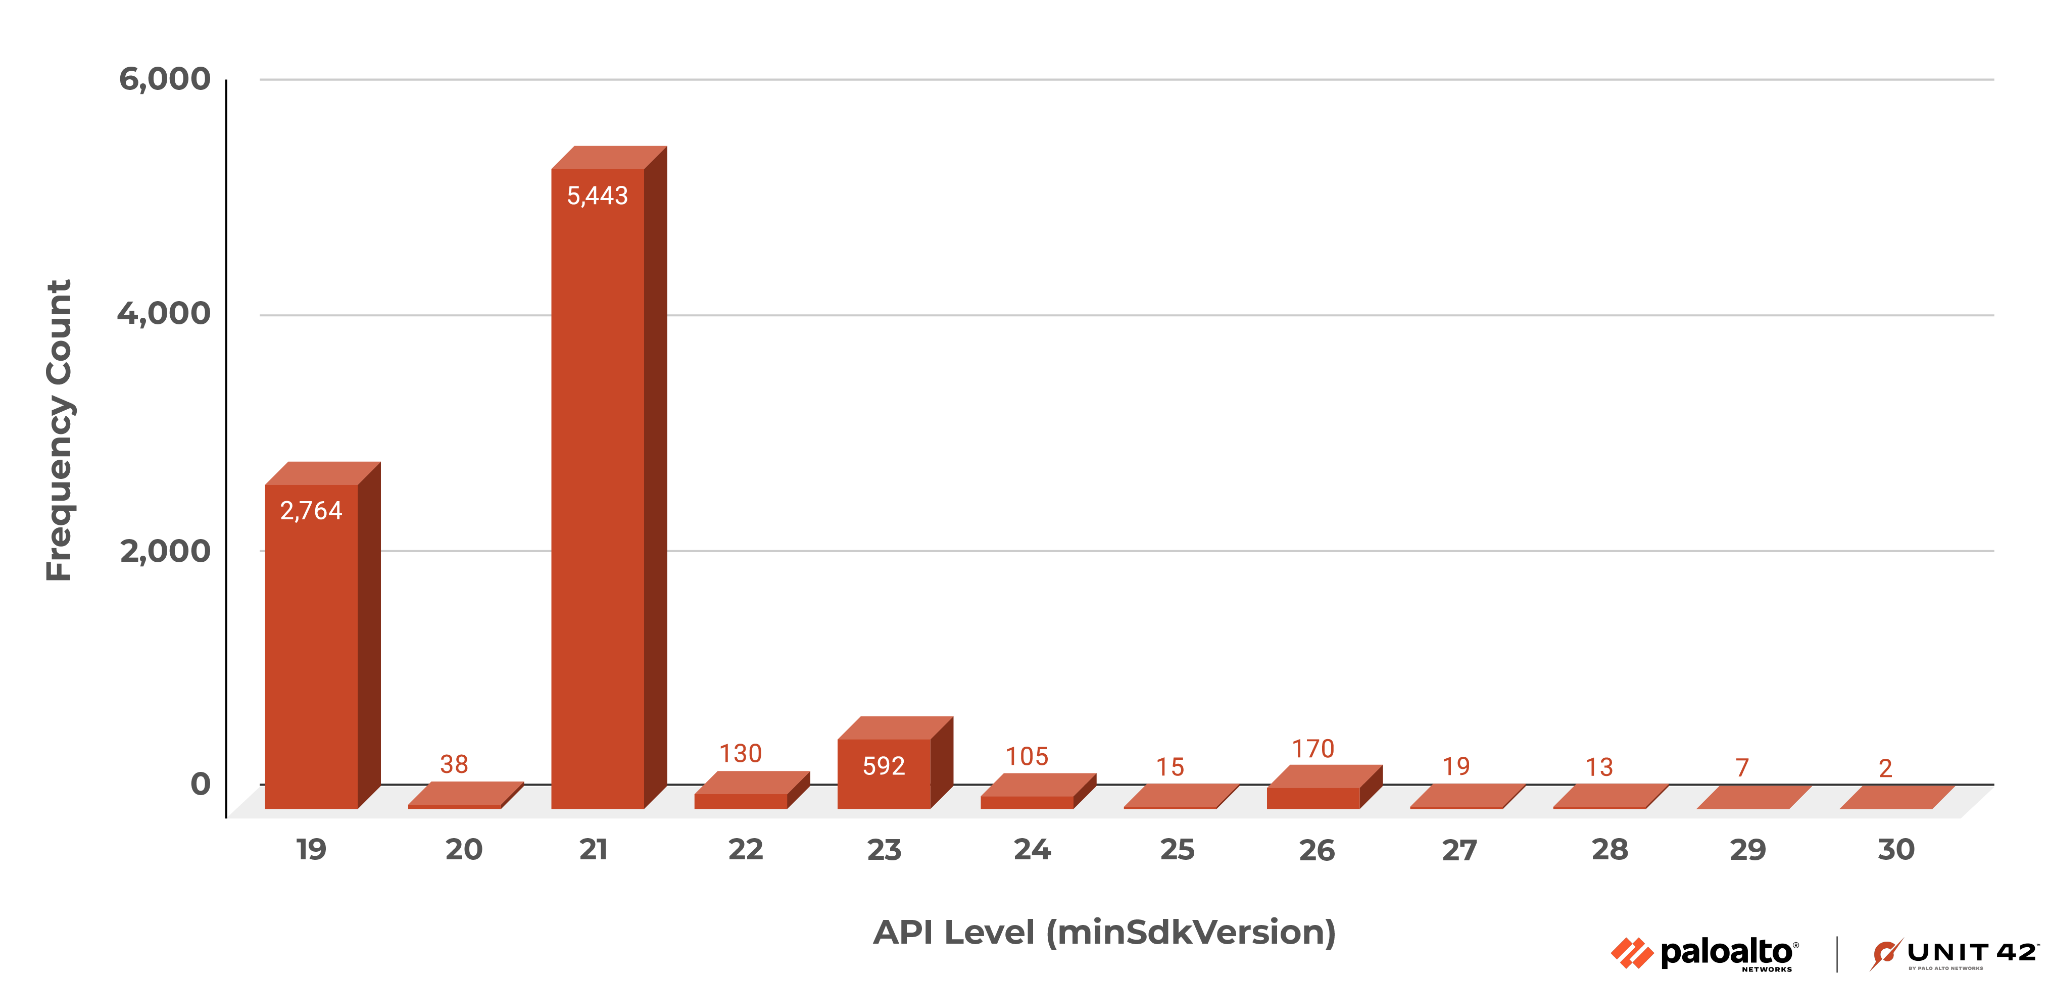 Image 3 is a column graph of APK malware samples in VirusTotal. The highest frequency is 21 at over 5,000. The next highest is 19 at almost 3,00 and then there isa severe drop to 23 with 592.